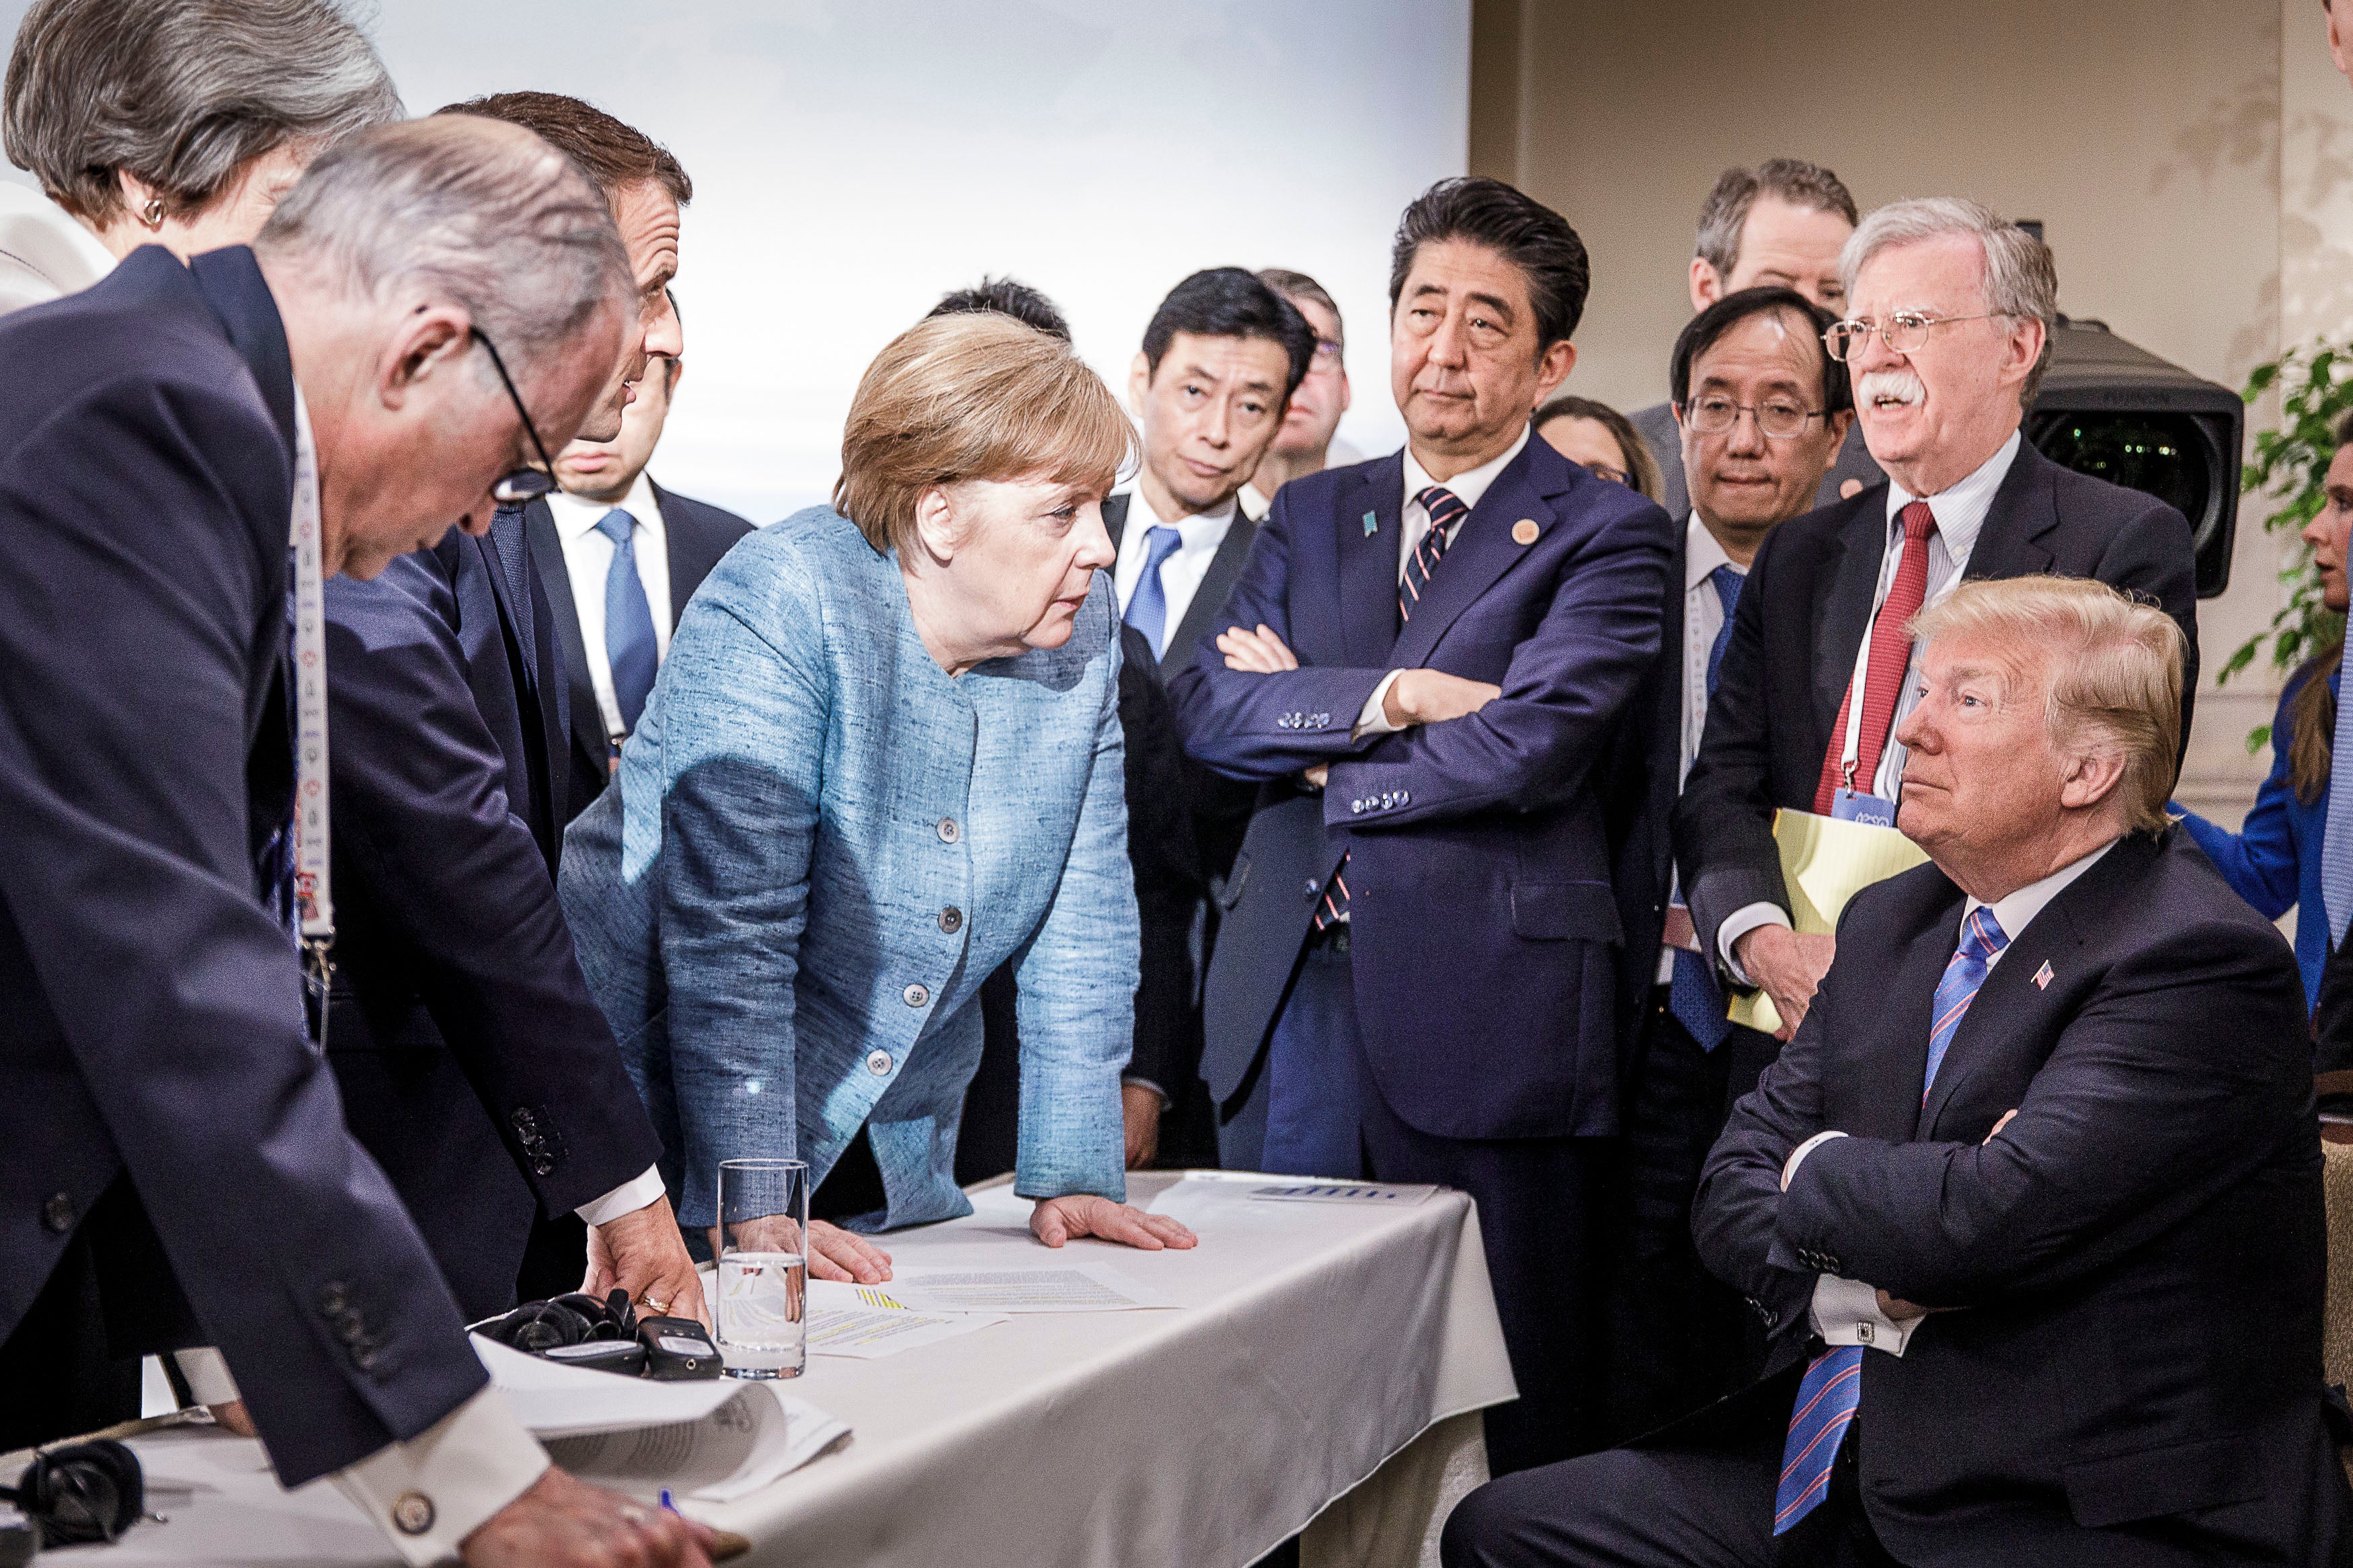 June 9, 2018: In this photo provided by the German Government Press Office, then German Chancellor Angela Merkel deliberates with US president Donald Trump on the sidelines of the official agenda on the second day of the G7 summit in Charlevoix, Canada